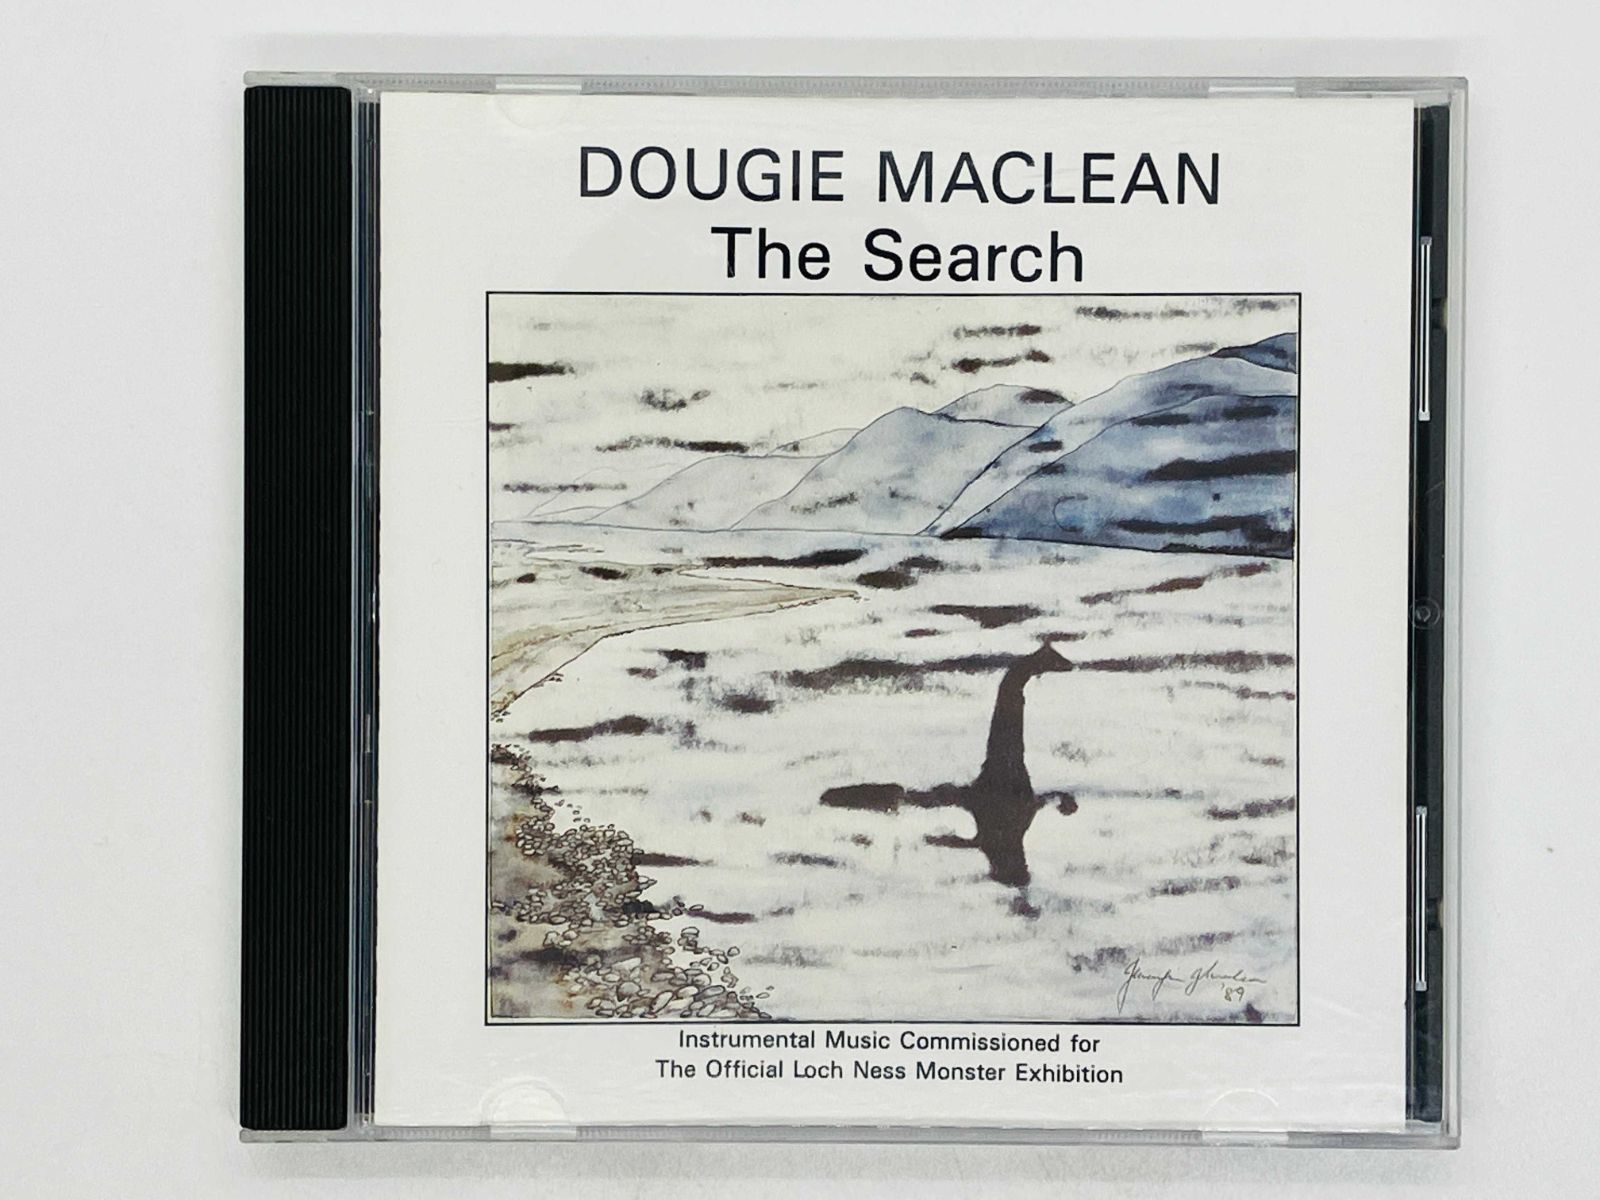 CD DOUGIE MACLEAN / THE SEARCH / ドギー・マクリーン / DUNCD011 X35